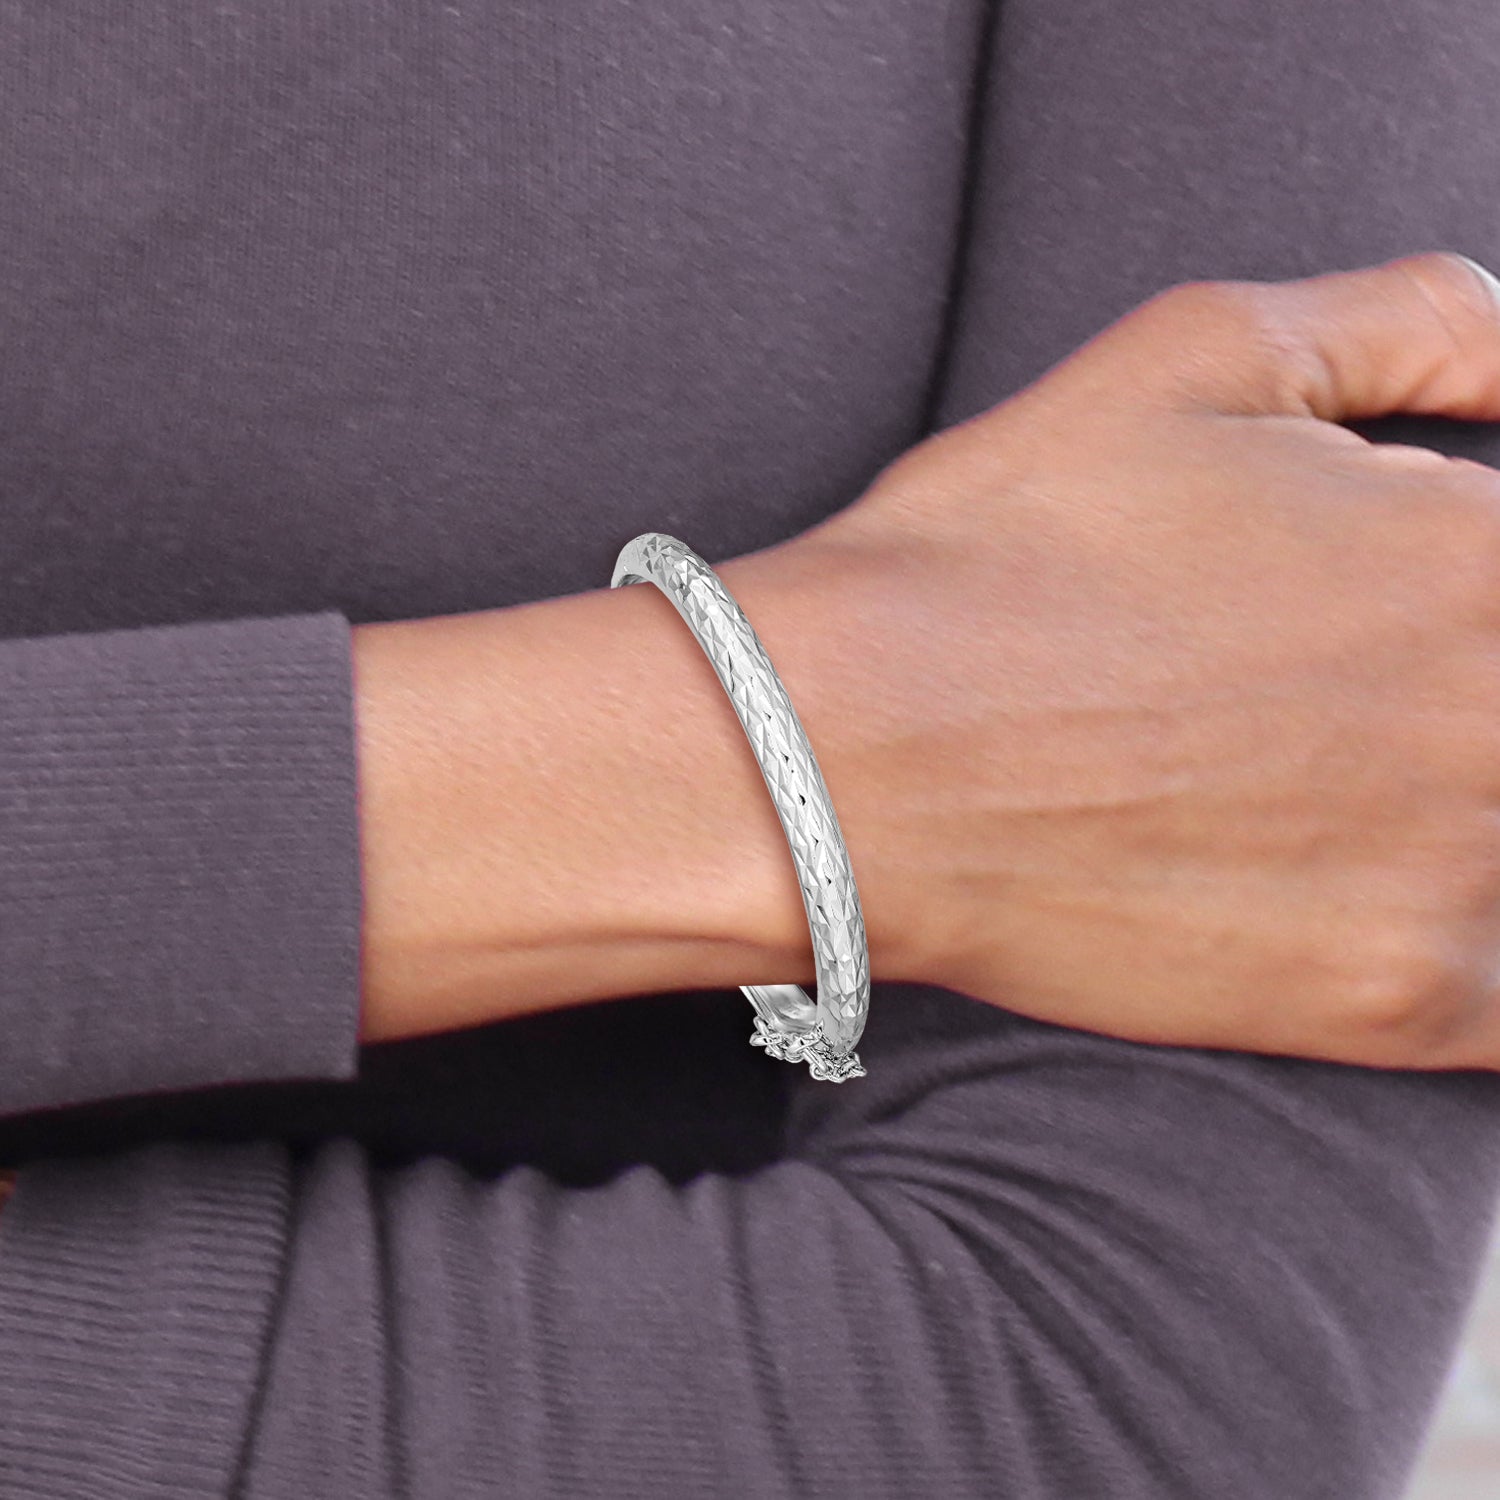 Sterling Silver Rhodium-plated Polished & Diamond-cut 4.5mm with Safety Clasp Hinged Children's Bangle